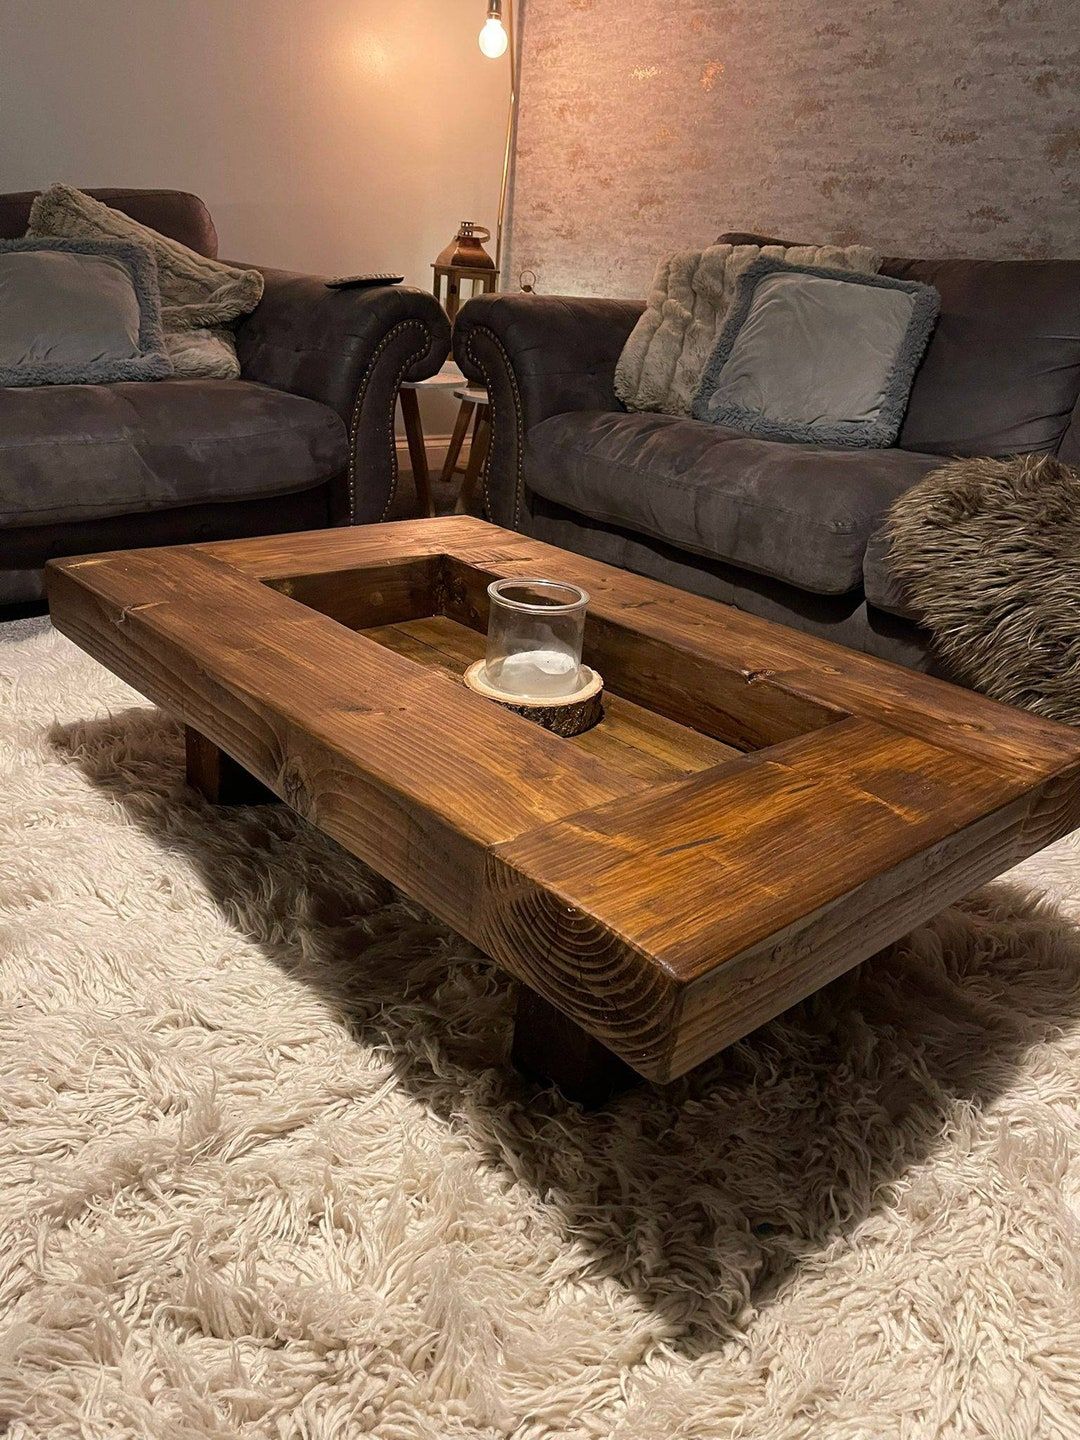 Rustic Handmade Solid Wood Sleeper Coffee Table Xtra Large Xtra Wide  Version – Etsy Regarding Brown Rustic Coffee Tables (View 7 of 15)